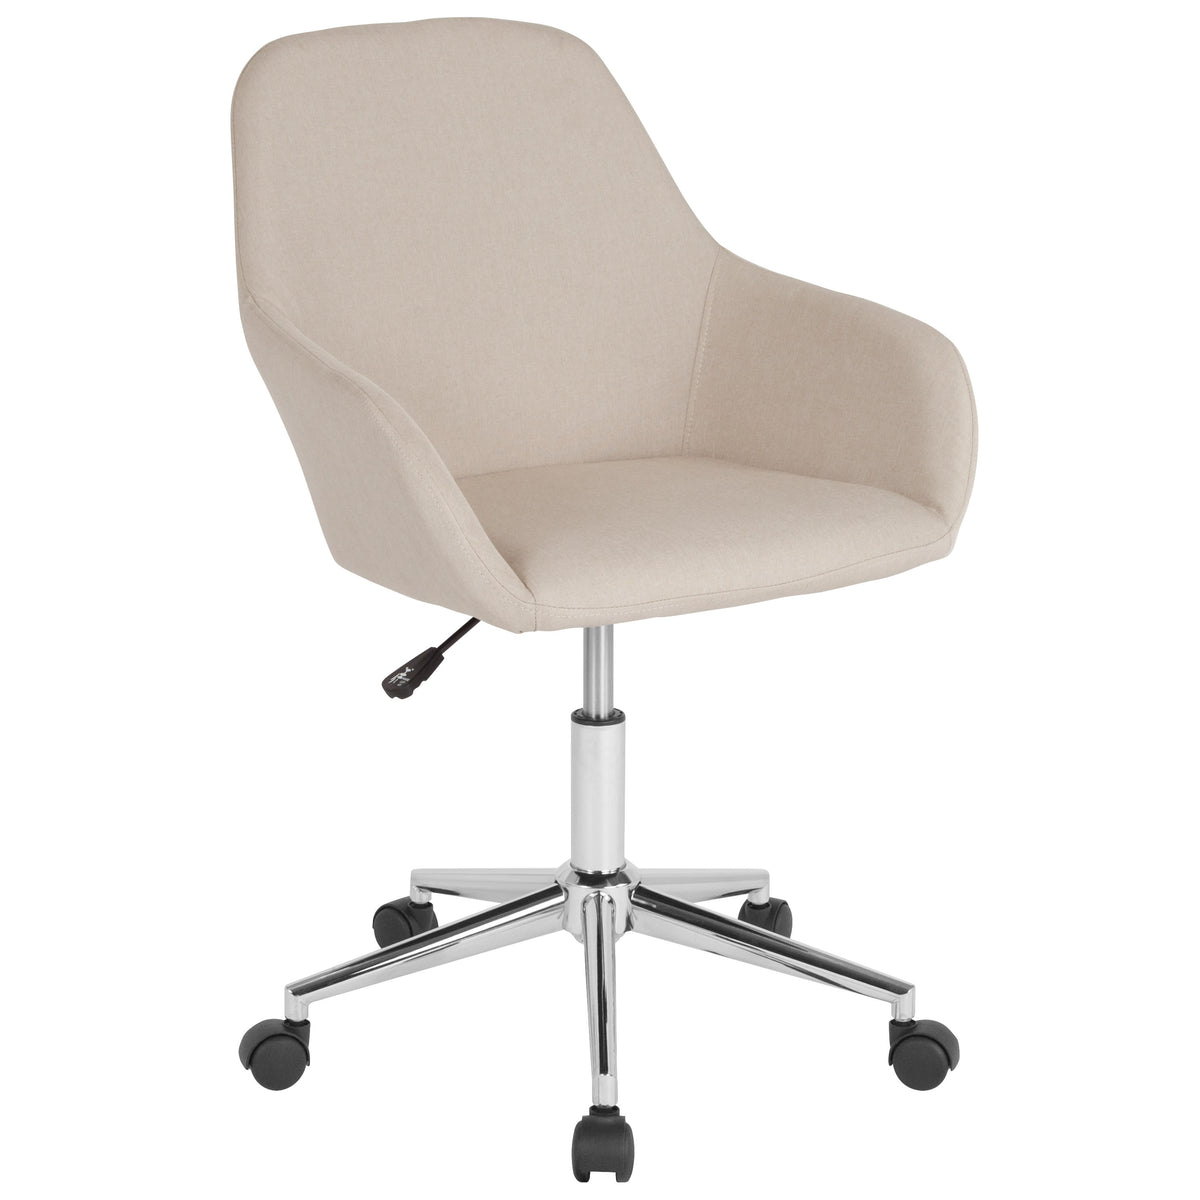 Beige Fabric |#| Home & Office Mid-Back Chair in Beige Fabric - Upholstered Chair - Swivel Chair